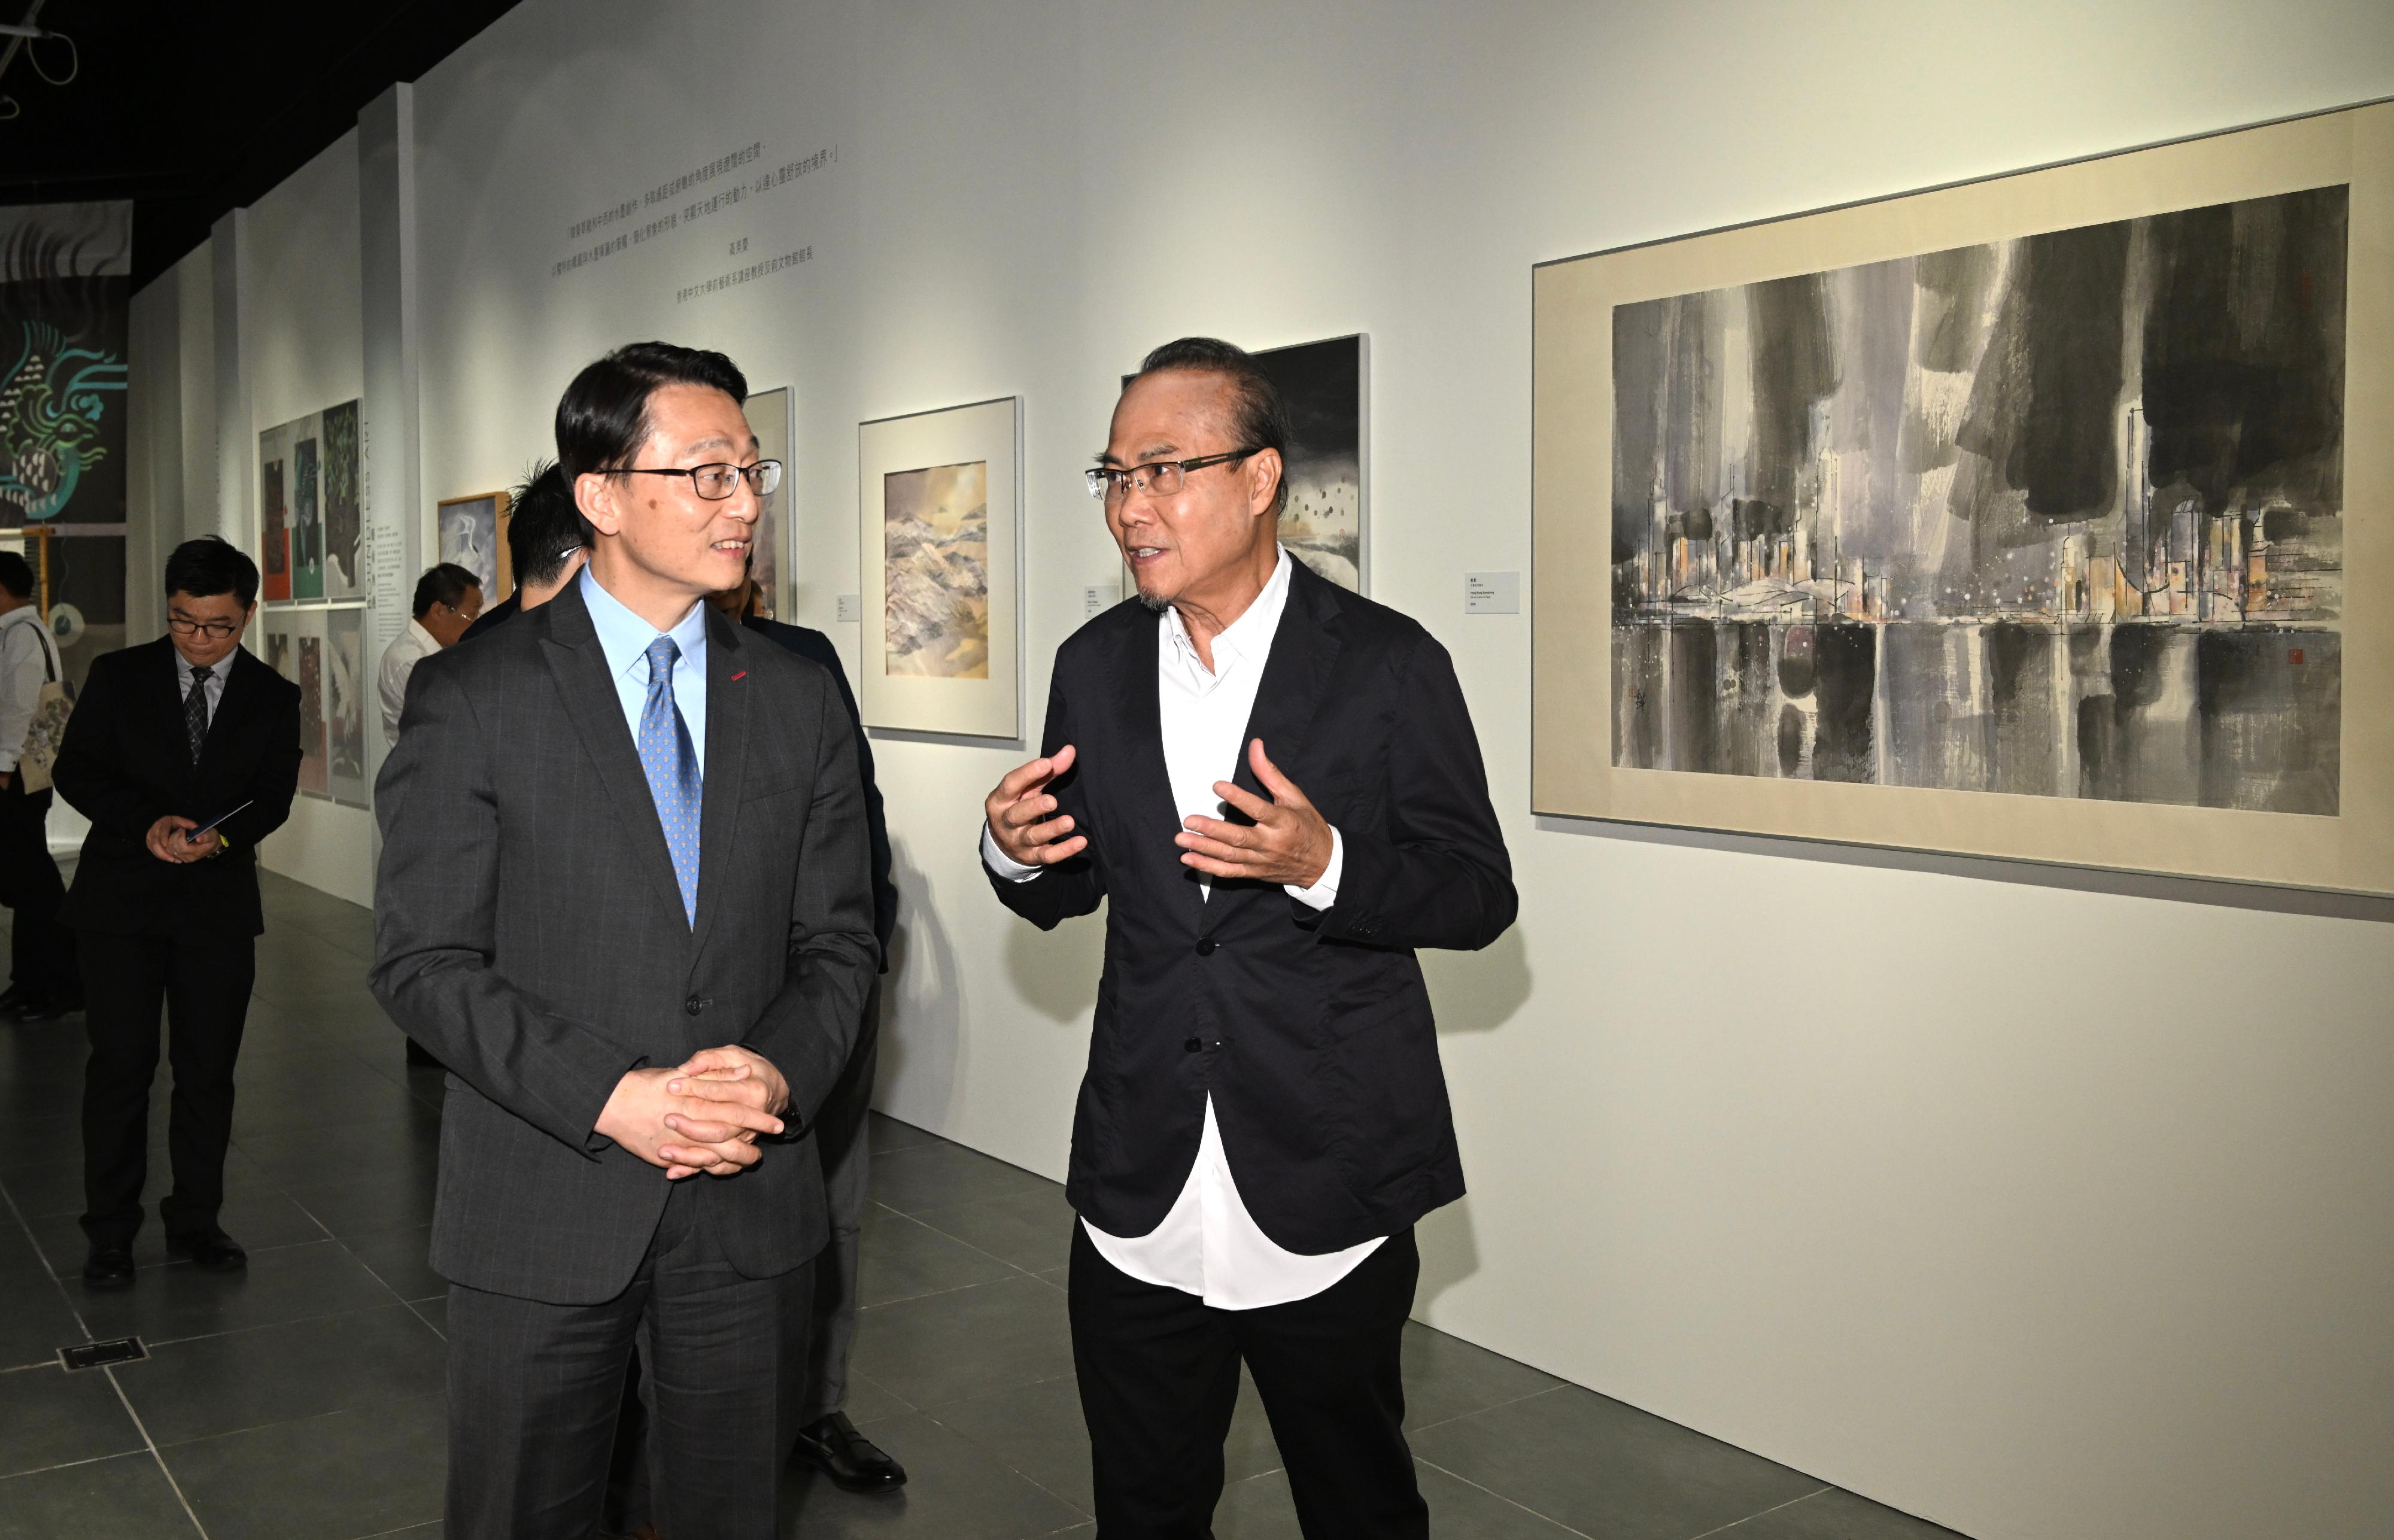 The opening ceremony for "The Reflection - Art & Design of Hon Bing-wah" exhibition was held today (November 14) at the Hong Kong Heritage Museum (HKHM). Photo shows designer and artist Professor Hon Bing-wah (right) introducing the exhibition to officiating guest, the Director of Leisure and Cultural Services, Mr Vincent Liu (left).